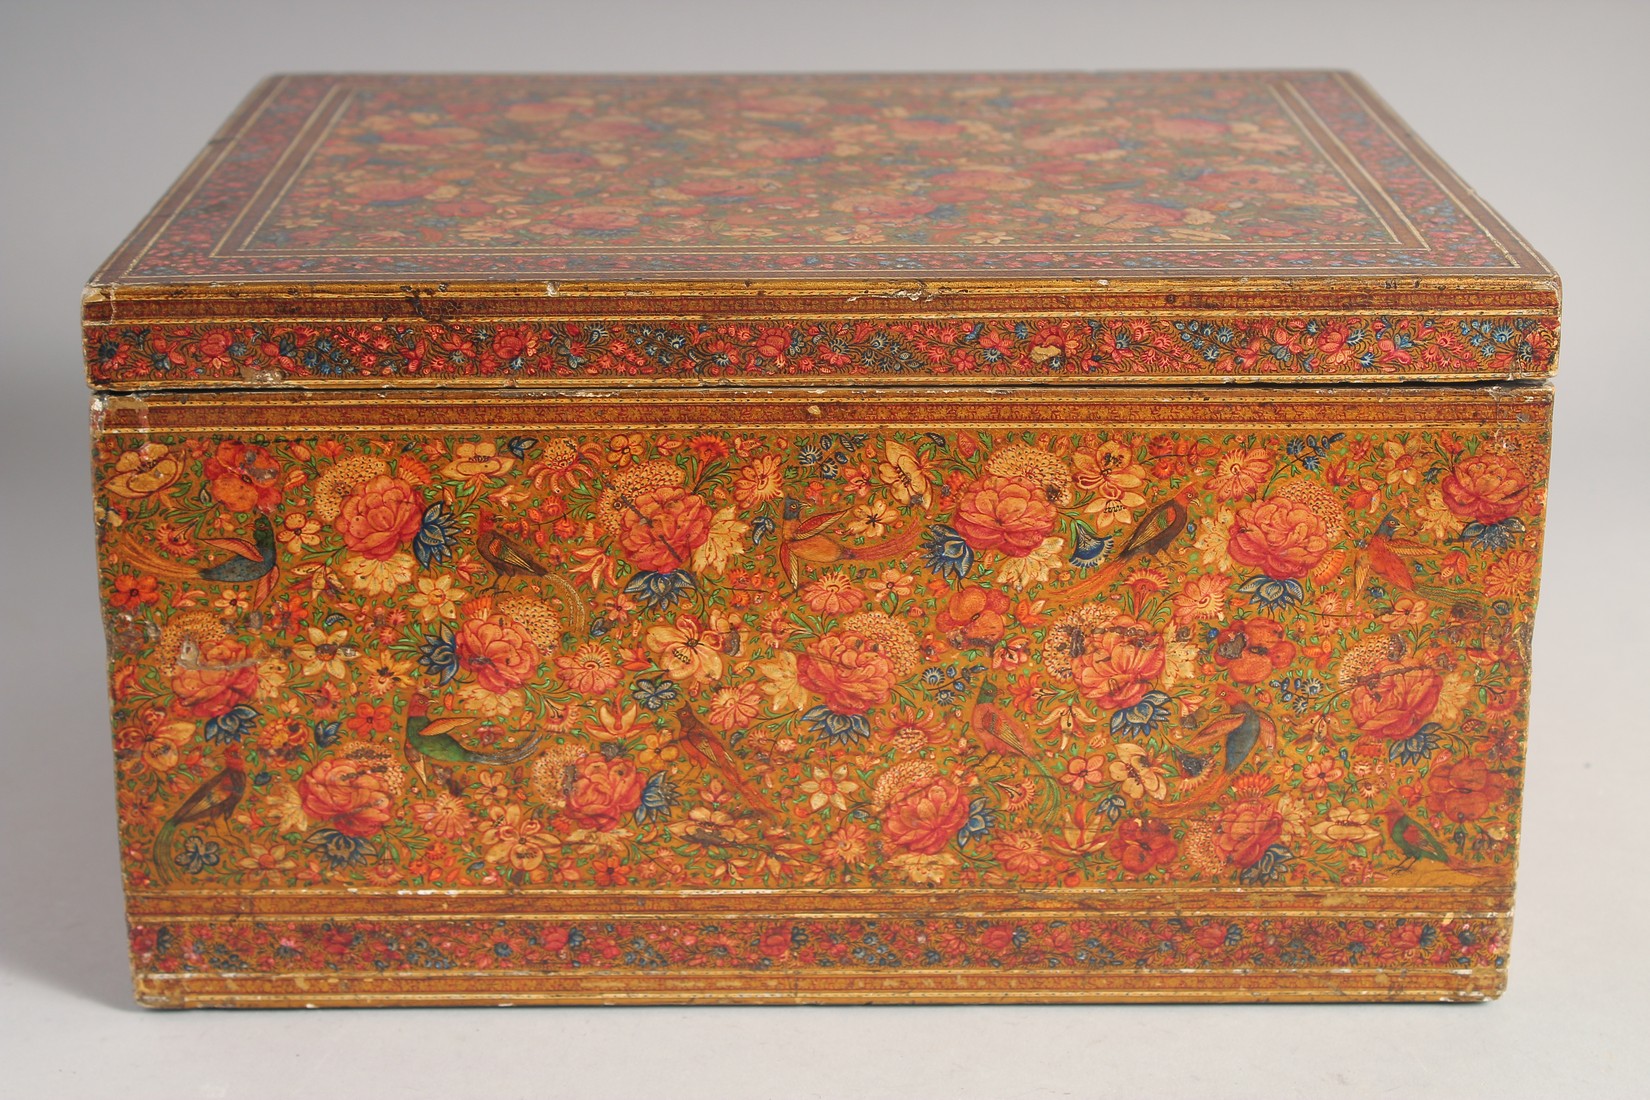 A VERY FINE MID-19TH CENTURY ANGLO-INDIAN KASHMIRI PAINTED, GILDED, AND LACQUERED BOX, depicting - Image 2 of 5